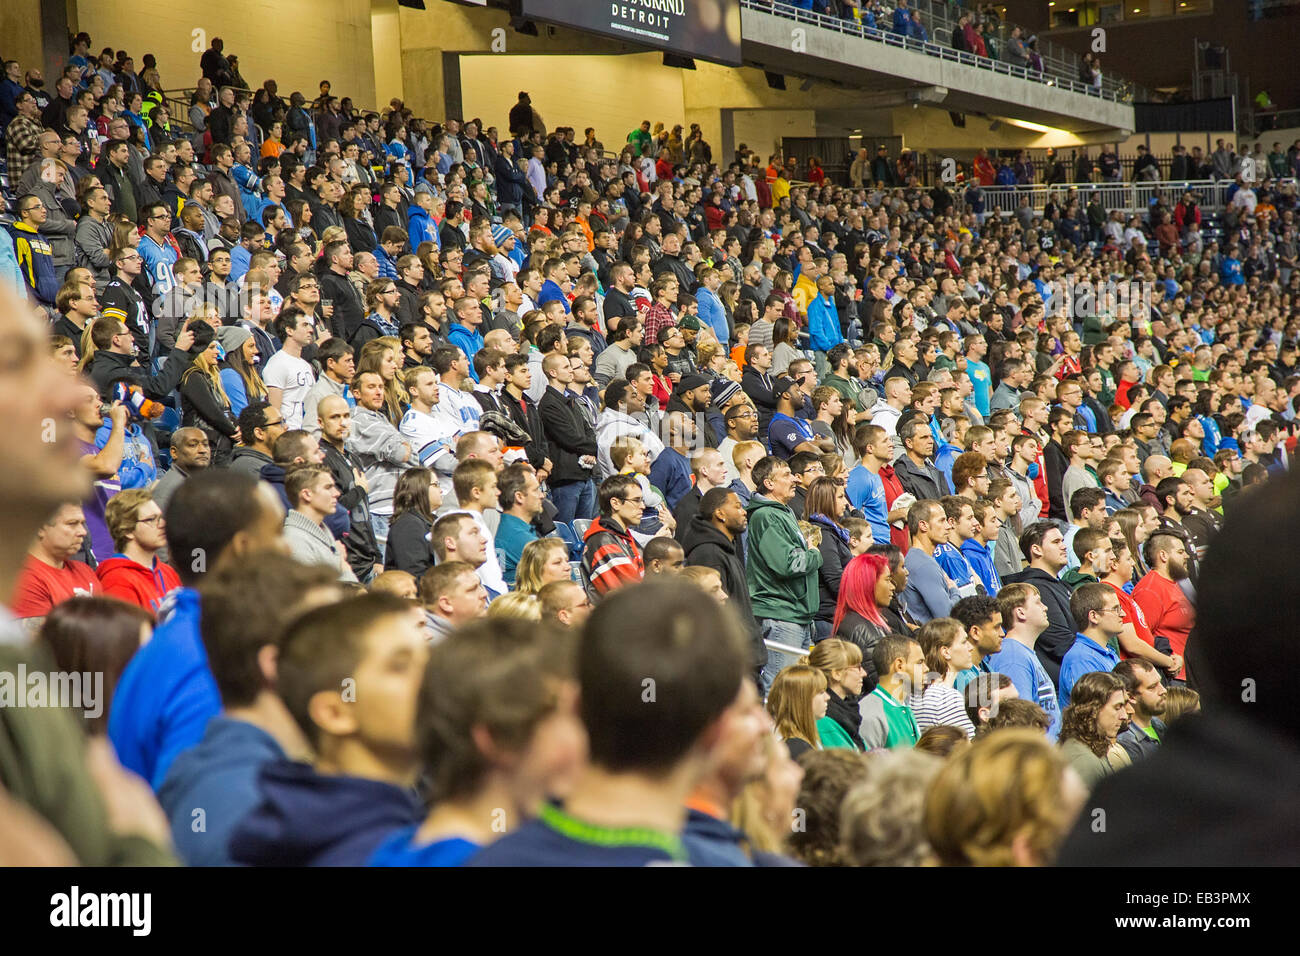 Detroit, Michigan - The crowd at a National Football League game at Ford Field. Stock Photo